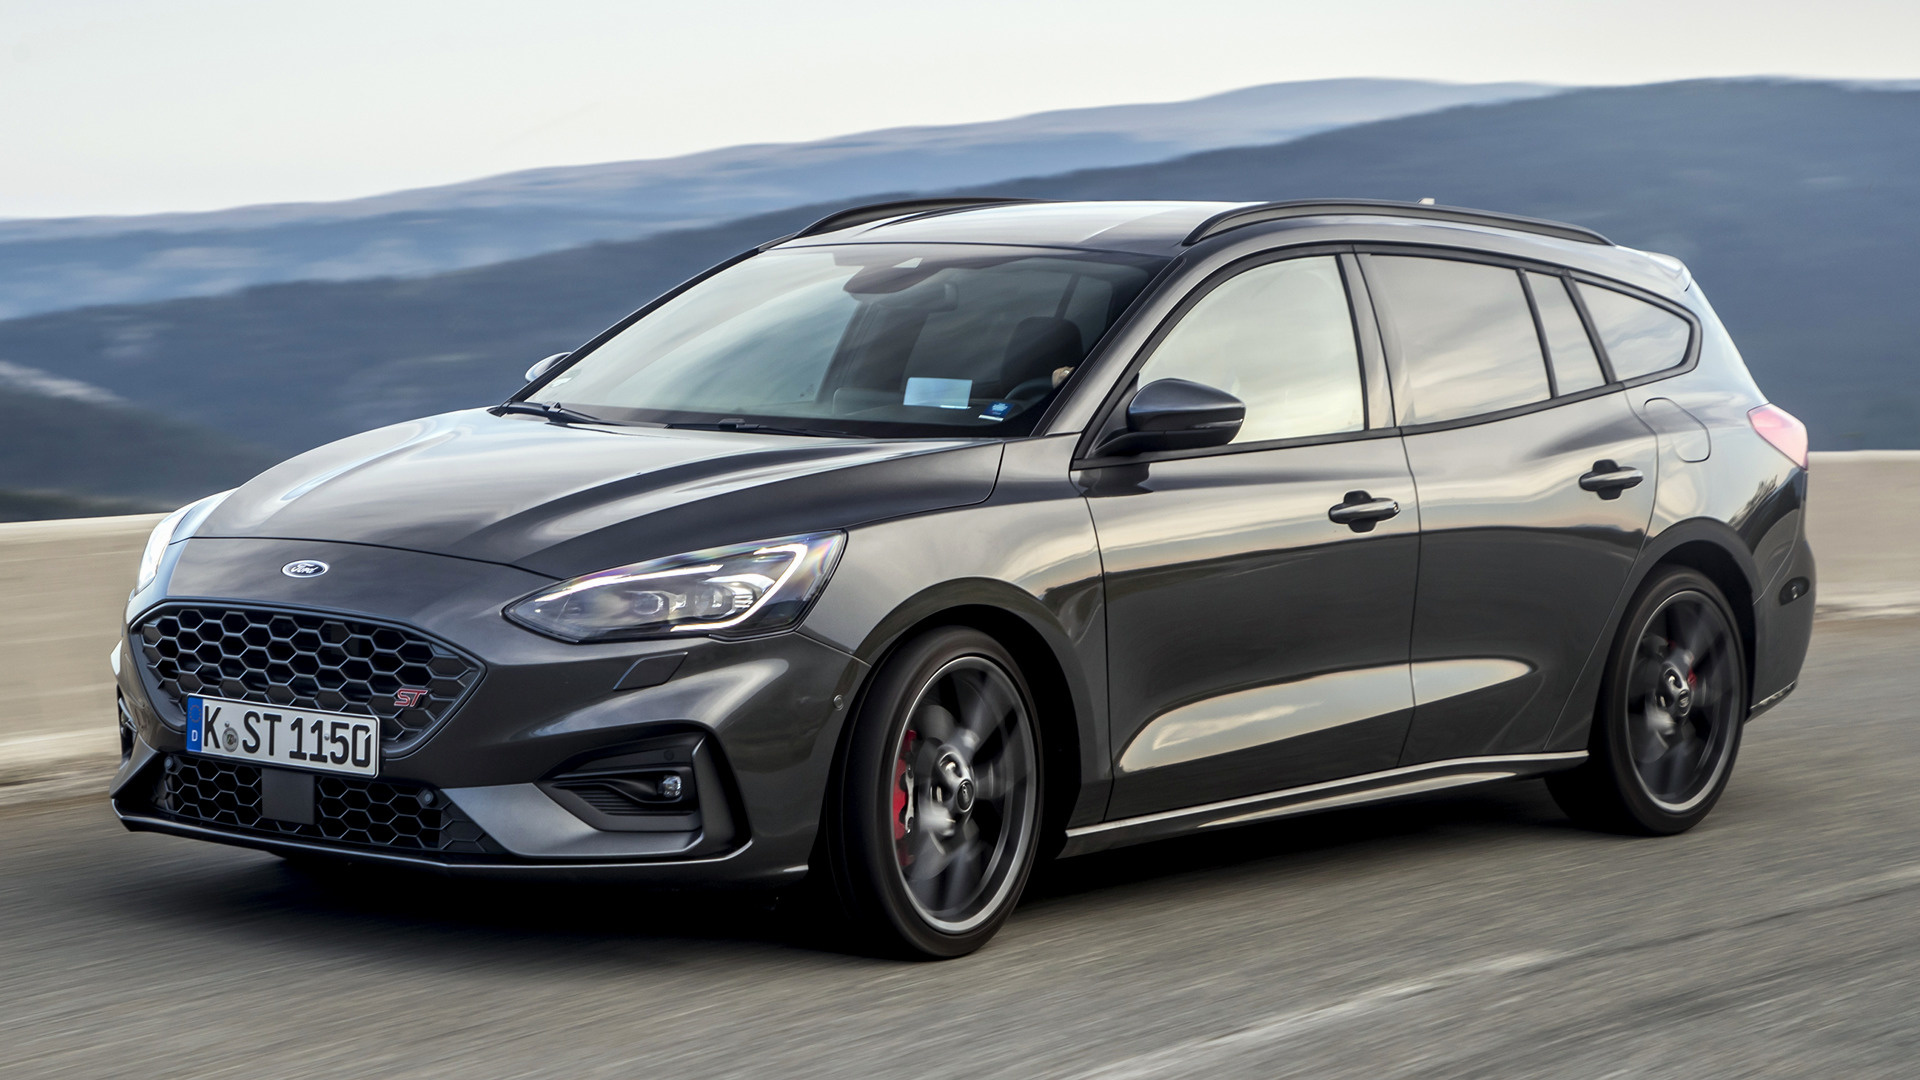 2019 Ford Focus ST Turnier - Wallpapers and HD Images | Car Pixel